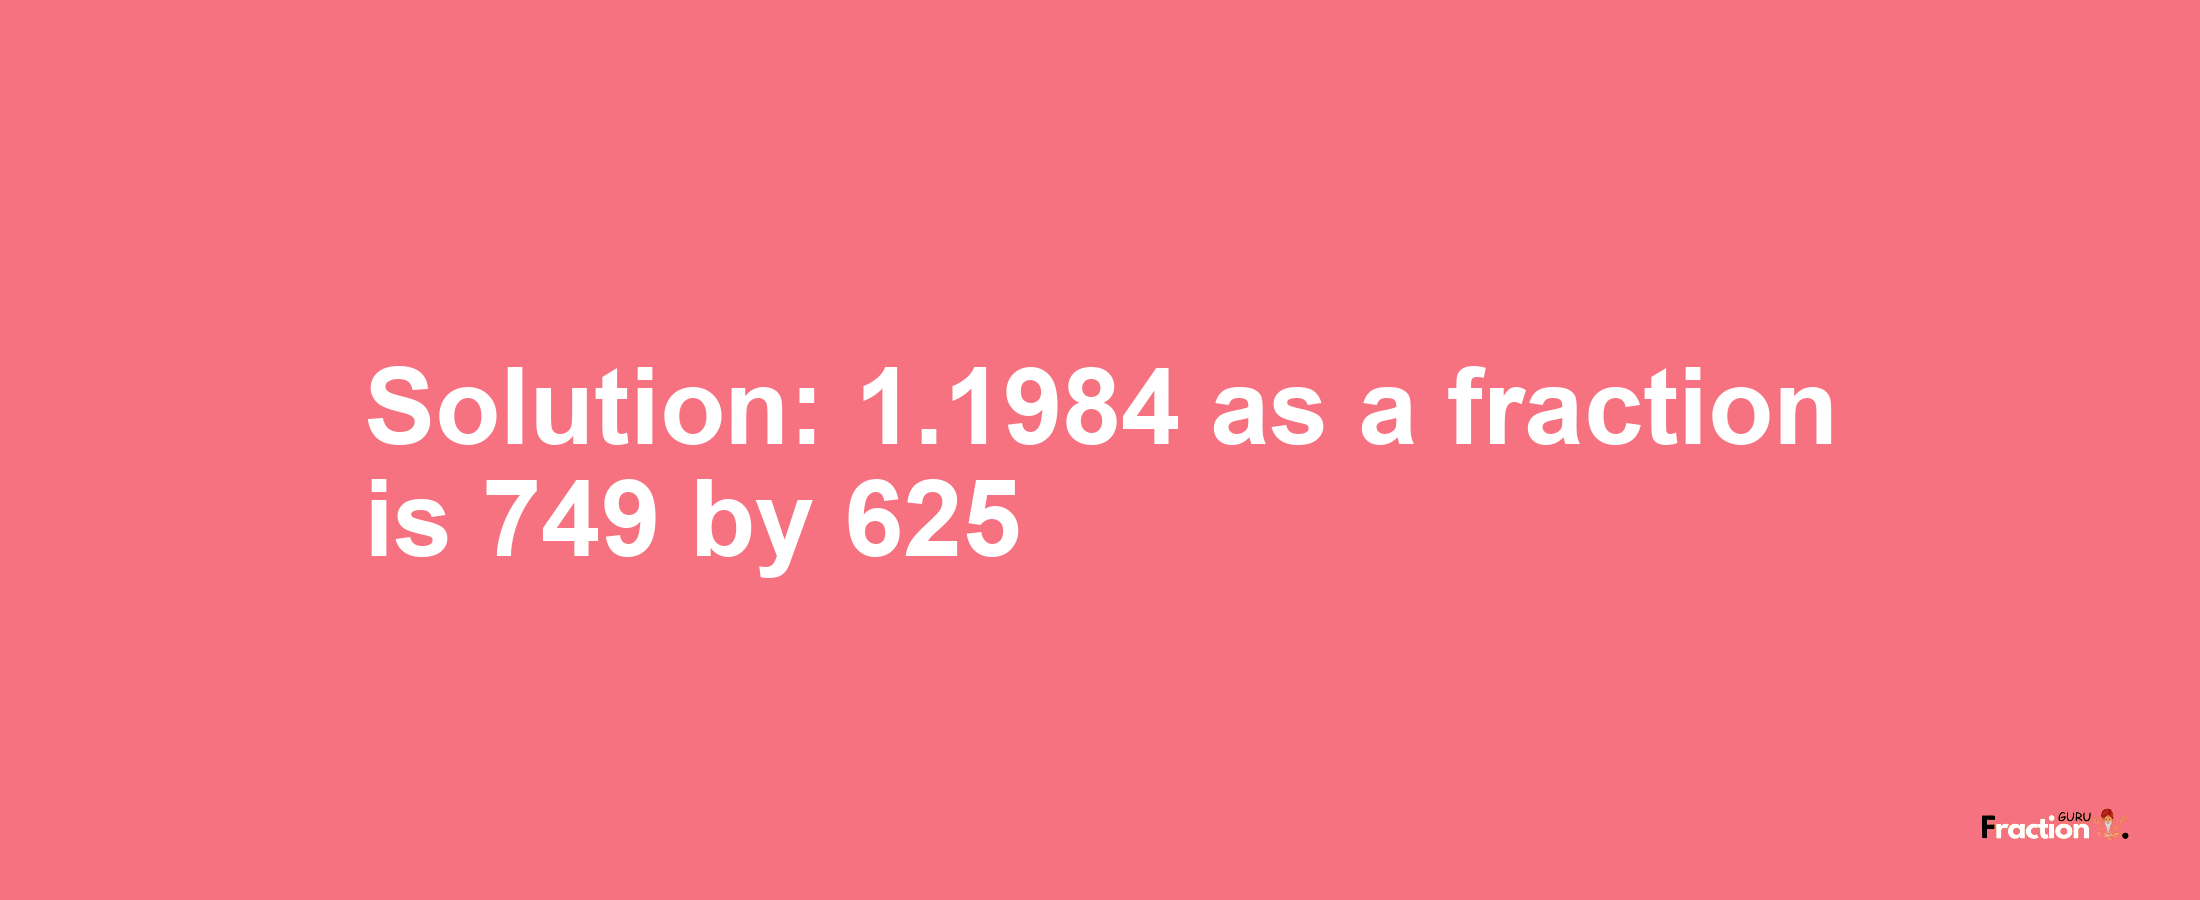 Solution:1.1984 as a fraction is 749/625